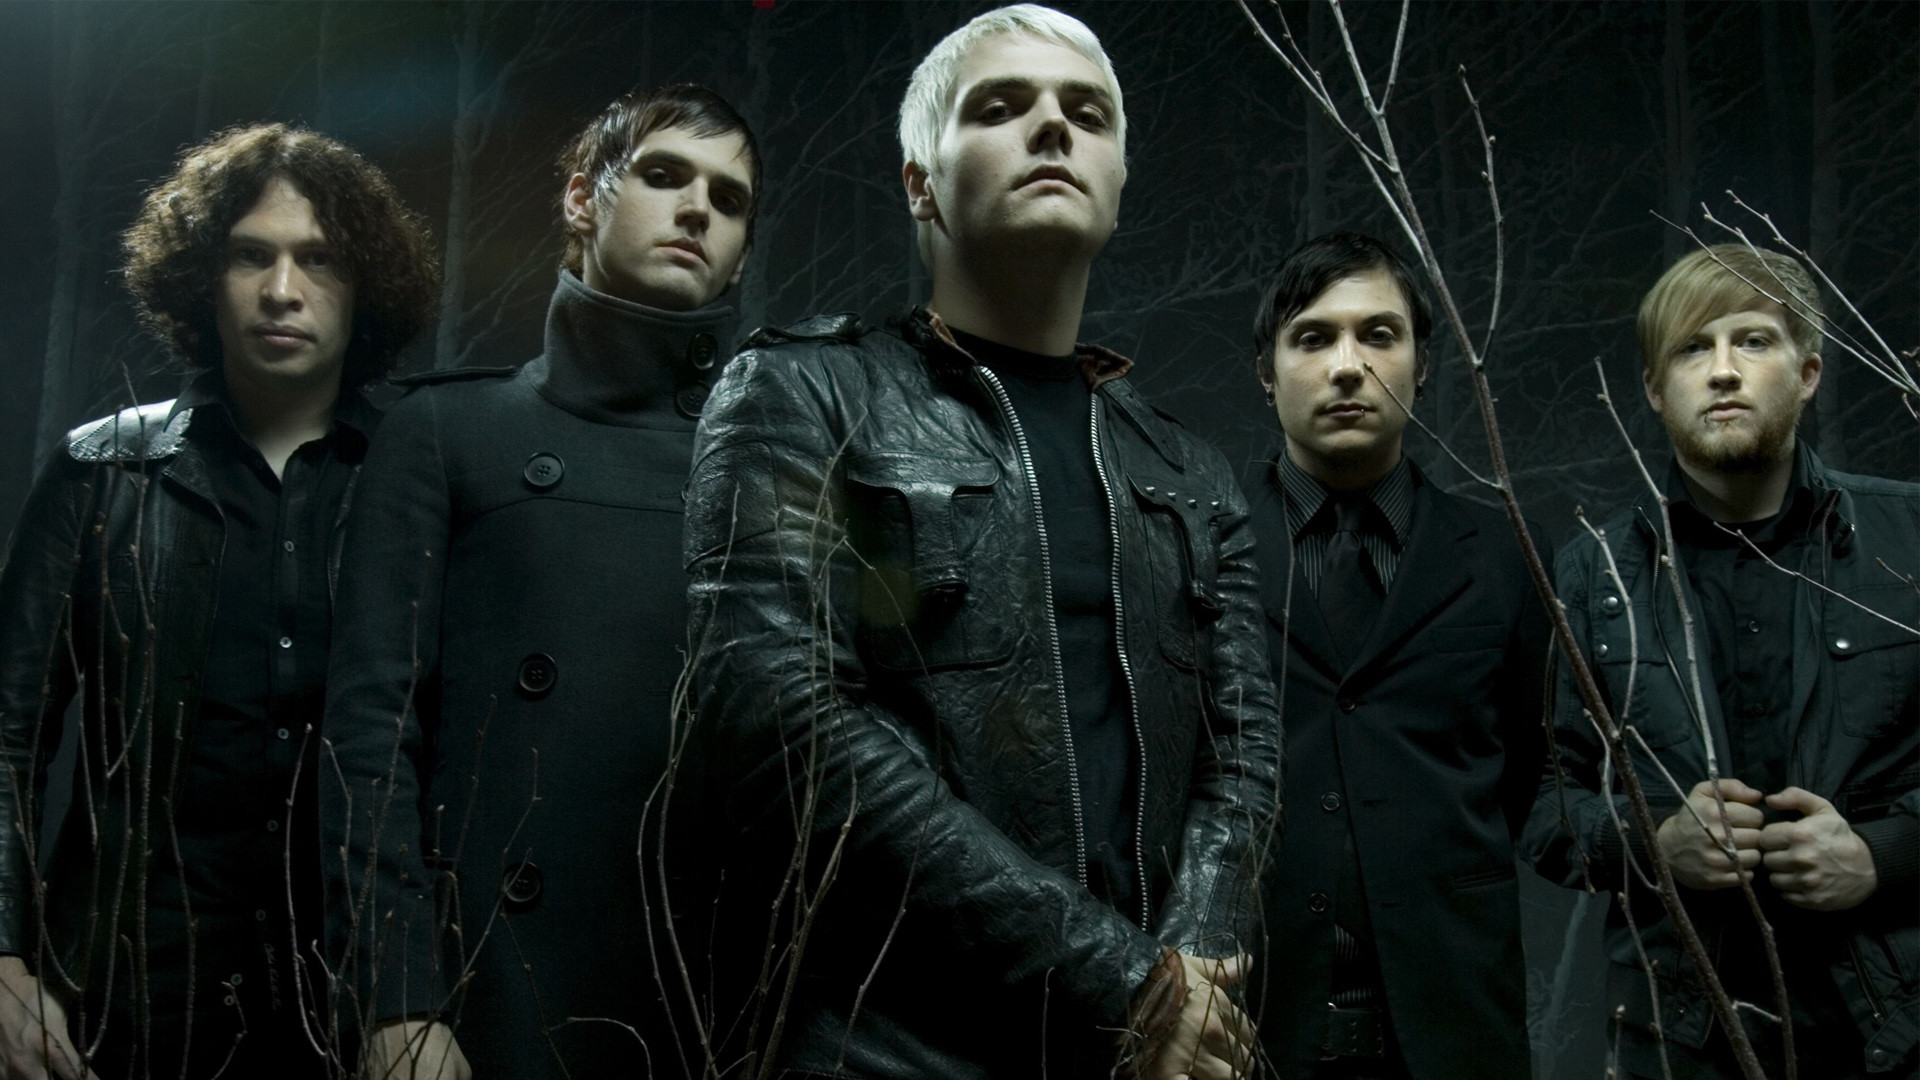 1920x1080 <b>My Chemical Romance wallpaper</b> for iPhone 5 that I